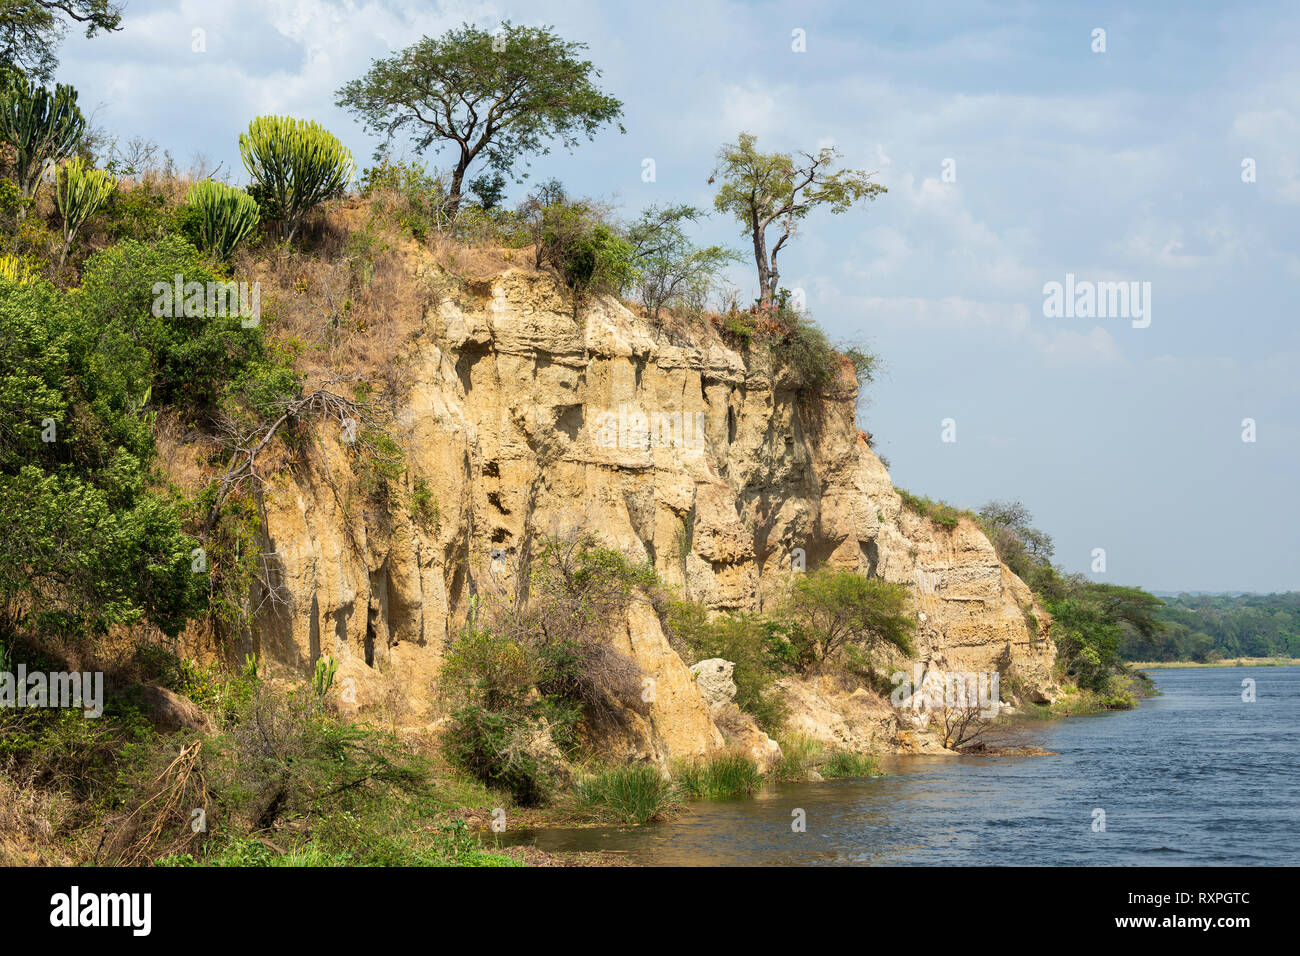 Vertical cliffs, home to bee-eater colony, on bank of Victoria Nile river in Murchison Falls National Park, Northern Uganda, East Africa Stock Photo